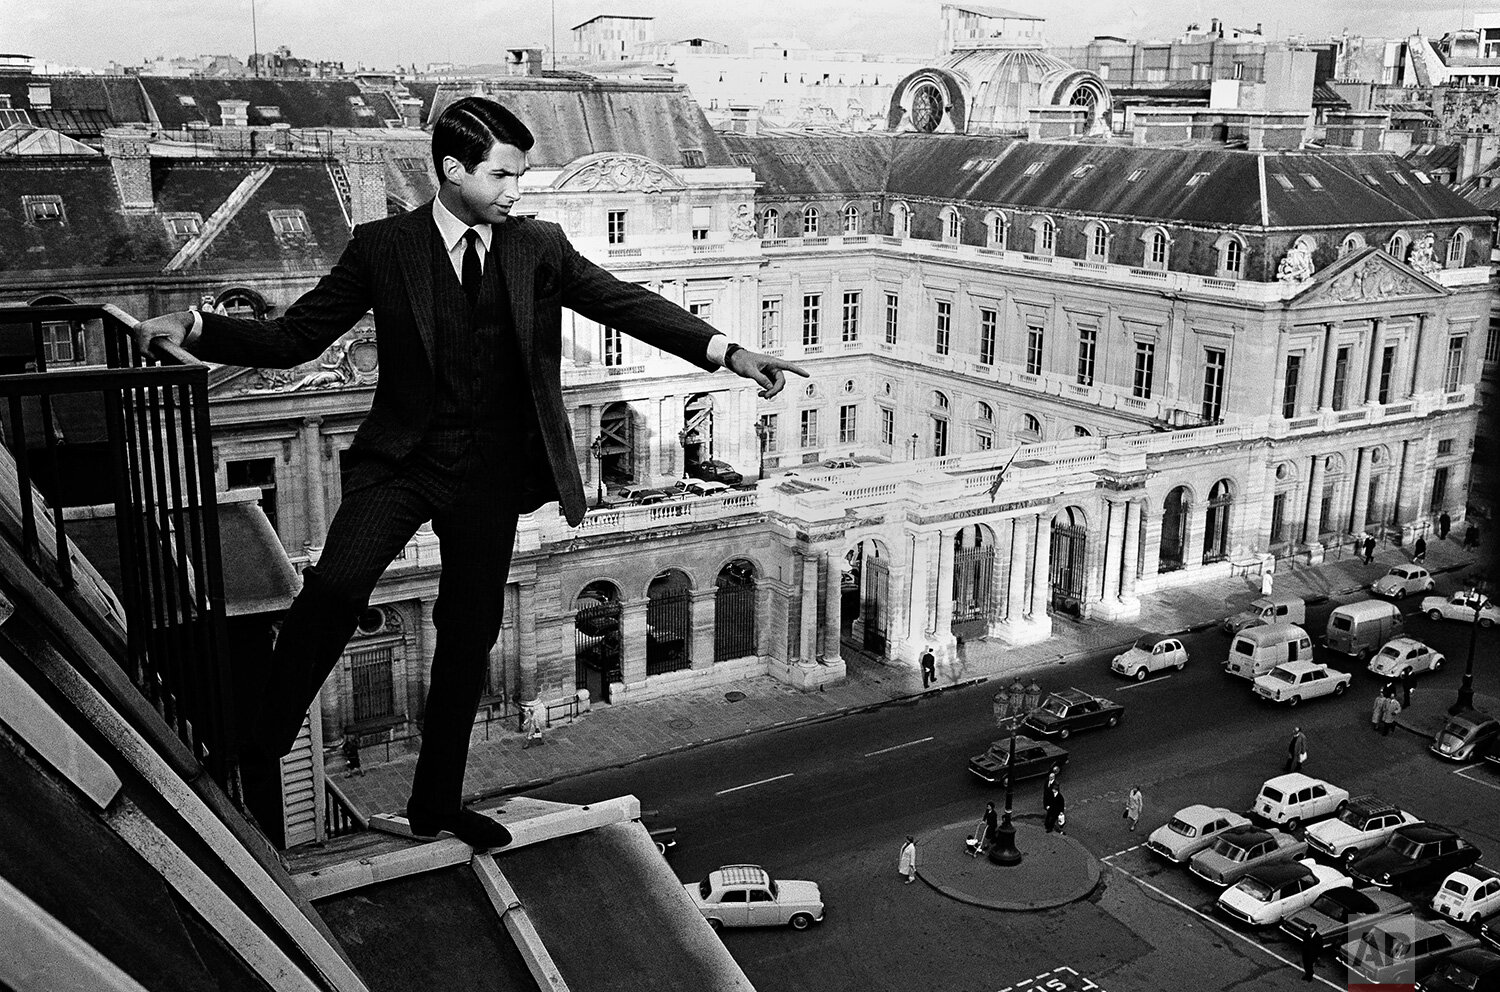  Actor George Hamilton walks on the roof of Hotel Louvre as he was filming ‘Jack of Diamonds’ on Oct. 17, 1966, in Paris, France. In the background is the building of the Le Conseil d’Etat (State Council). (AP Photo/Jean-Jacques Levy) 